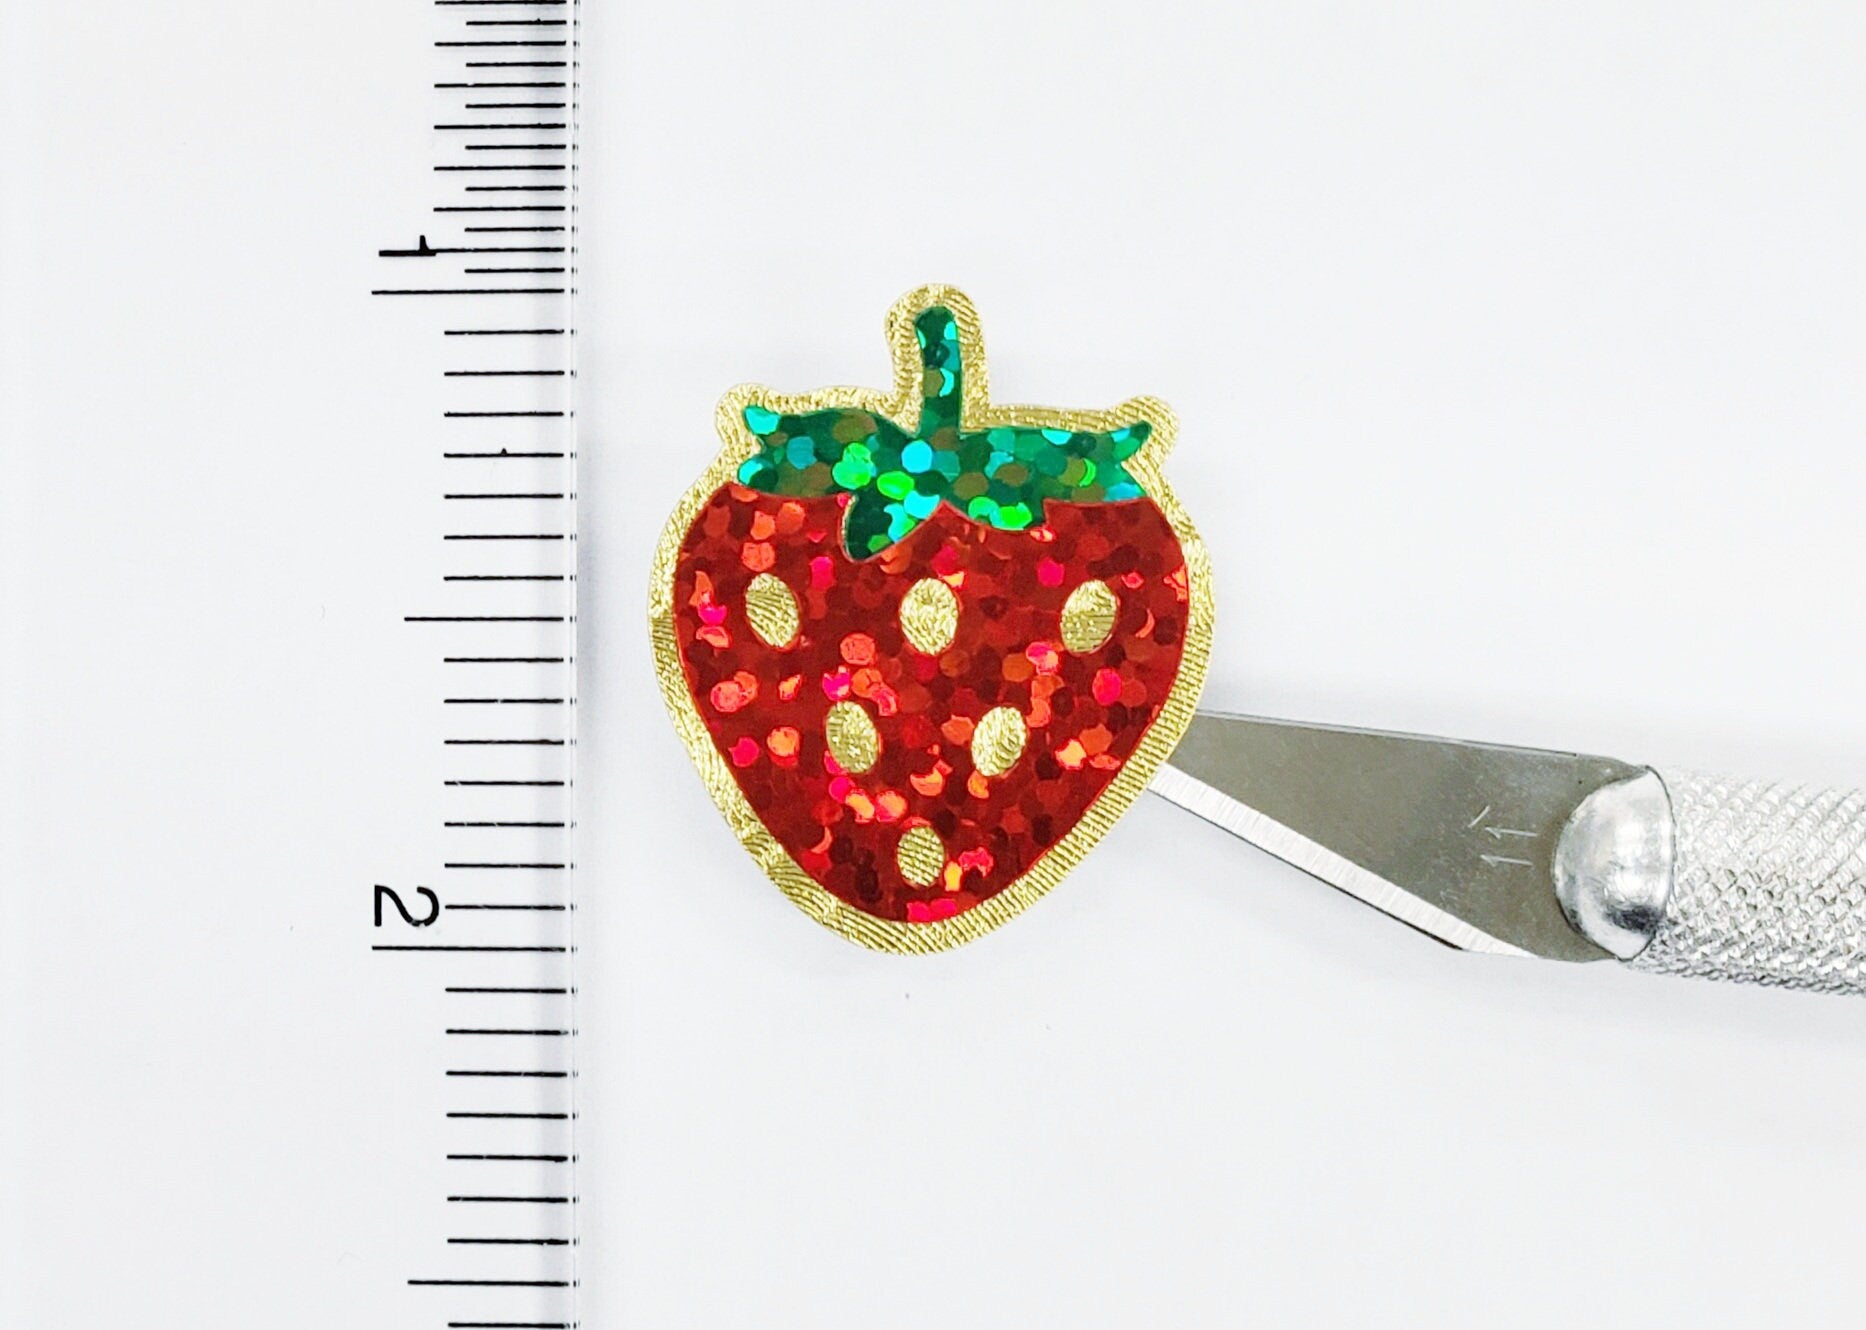 Strawberry Stickers, set of 12 or 24 red and green summer fruit stickers for envelopes, cards, notebooks, drink cups and craft projects.